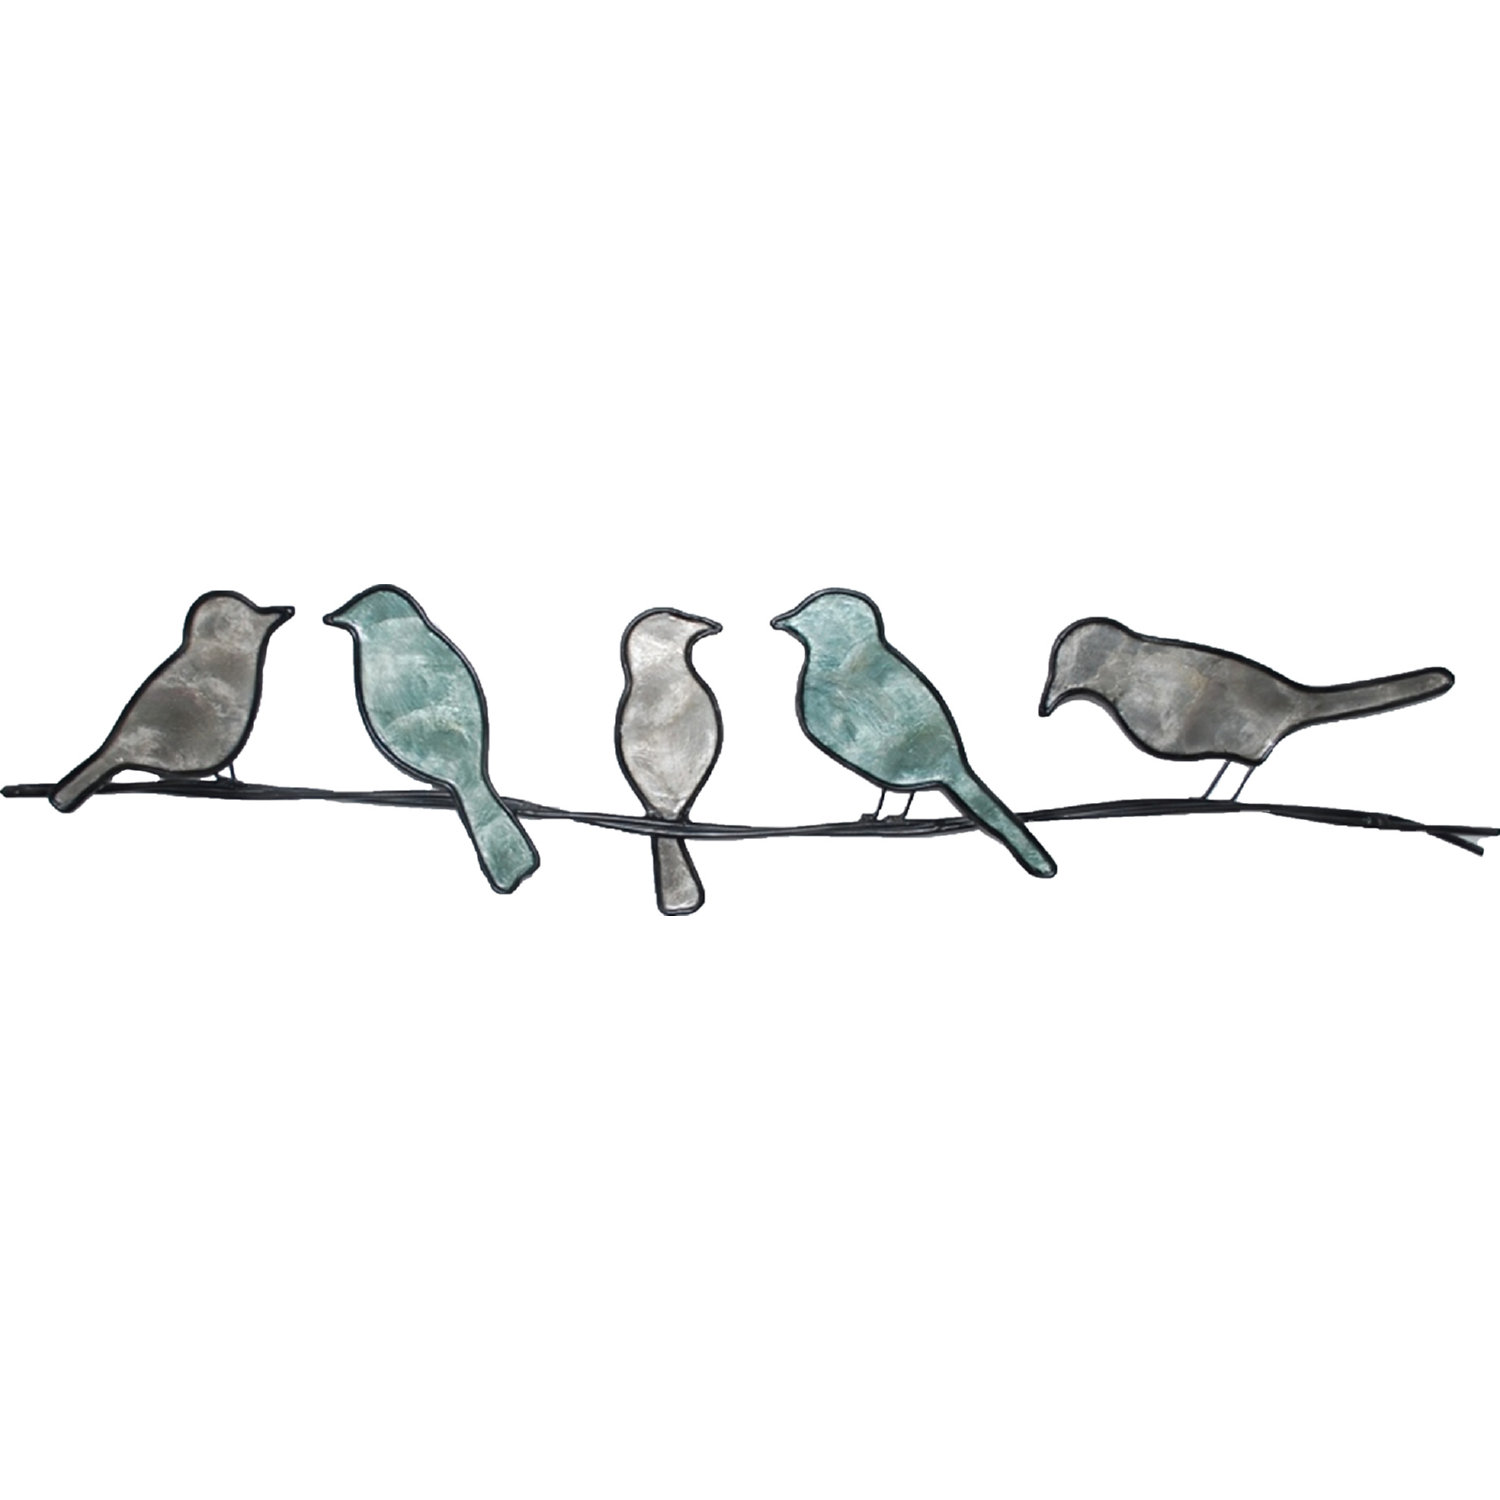 Eangee M7005-G Birds on a Wire Wall Decor in Green Capiz & Metal